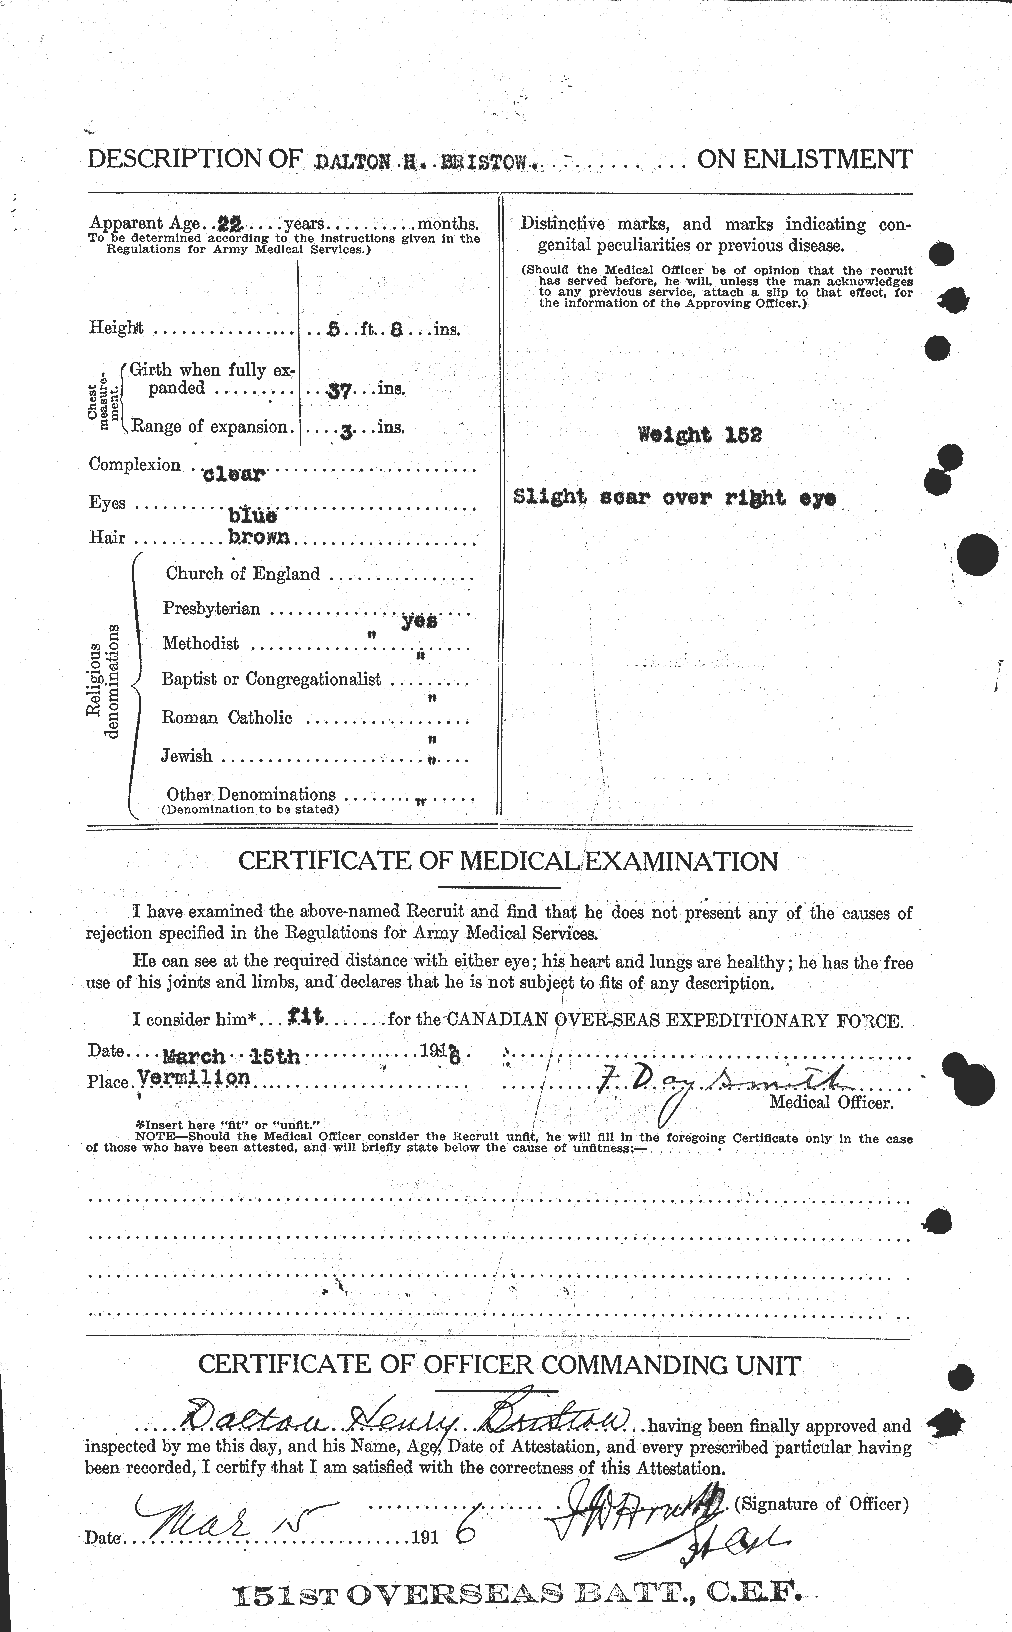 Personnel Records of the First World War - CEF 260343b